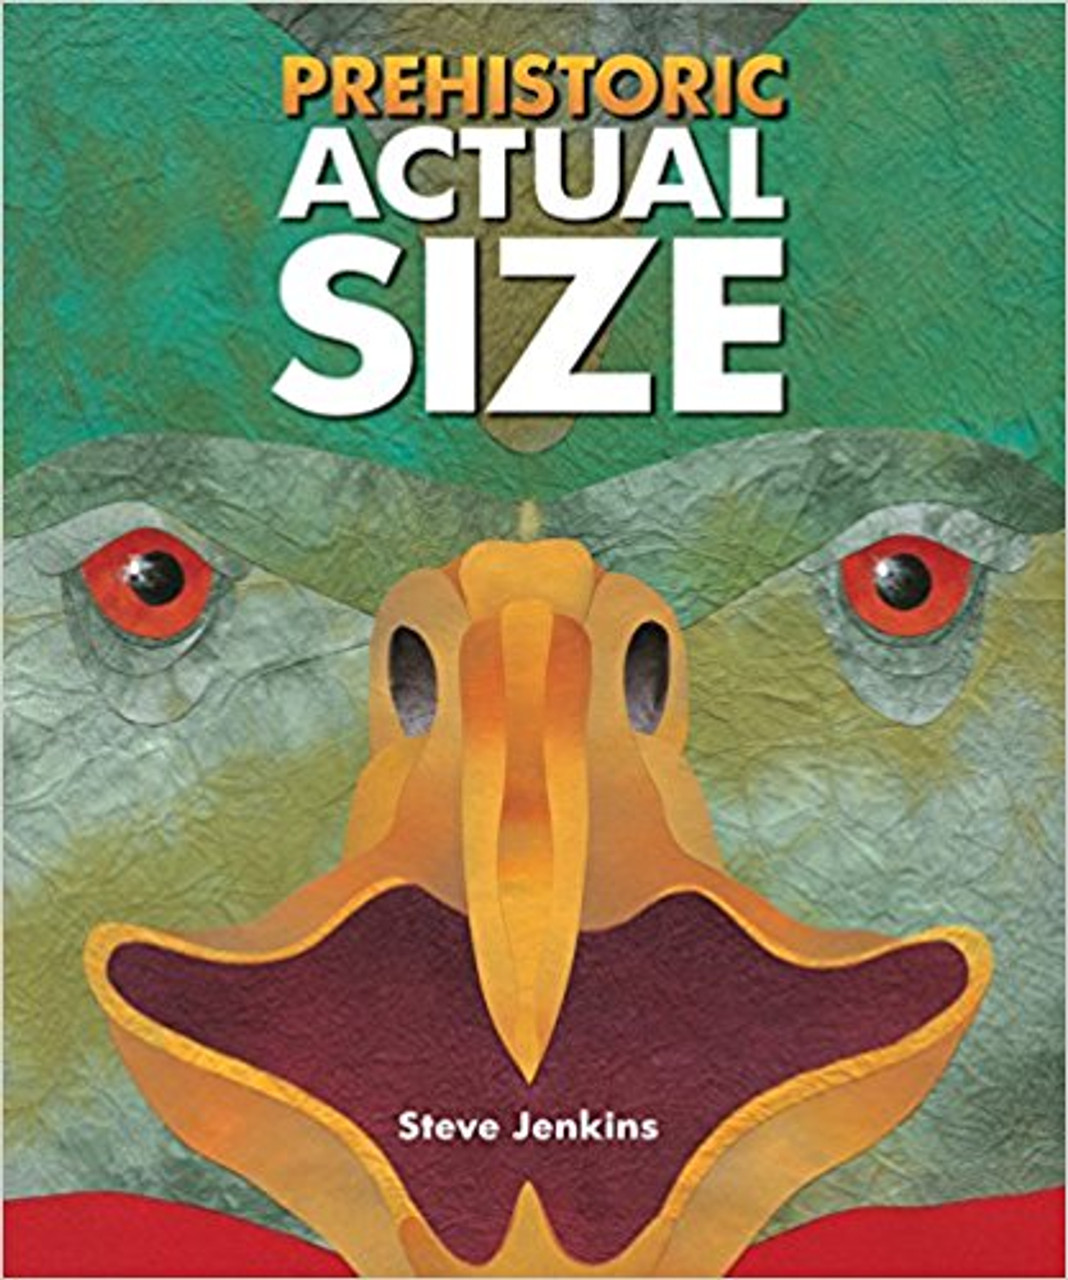 Prehistoric Actual Size (Hard Cover) by Steve Jenkins